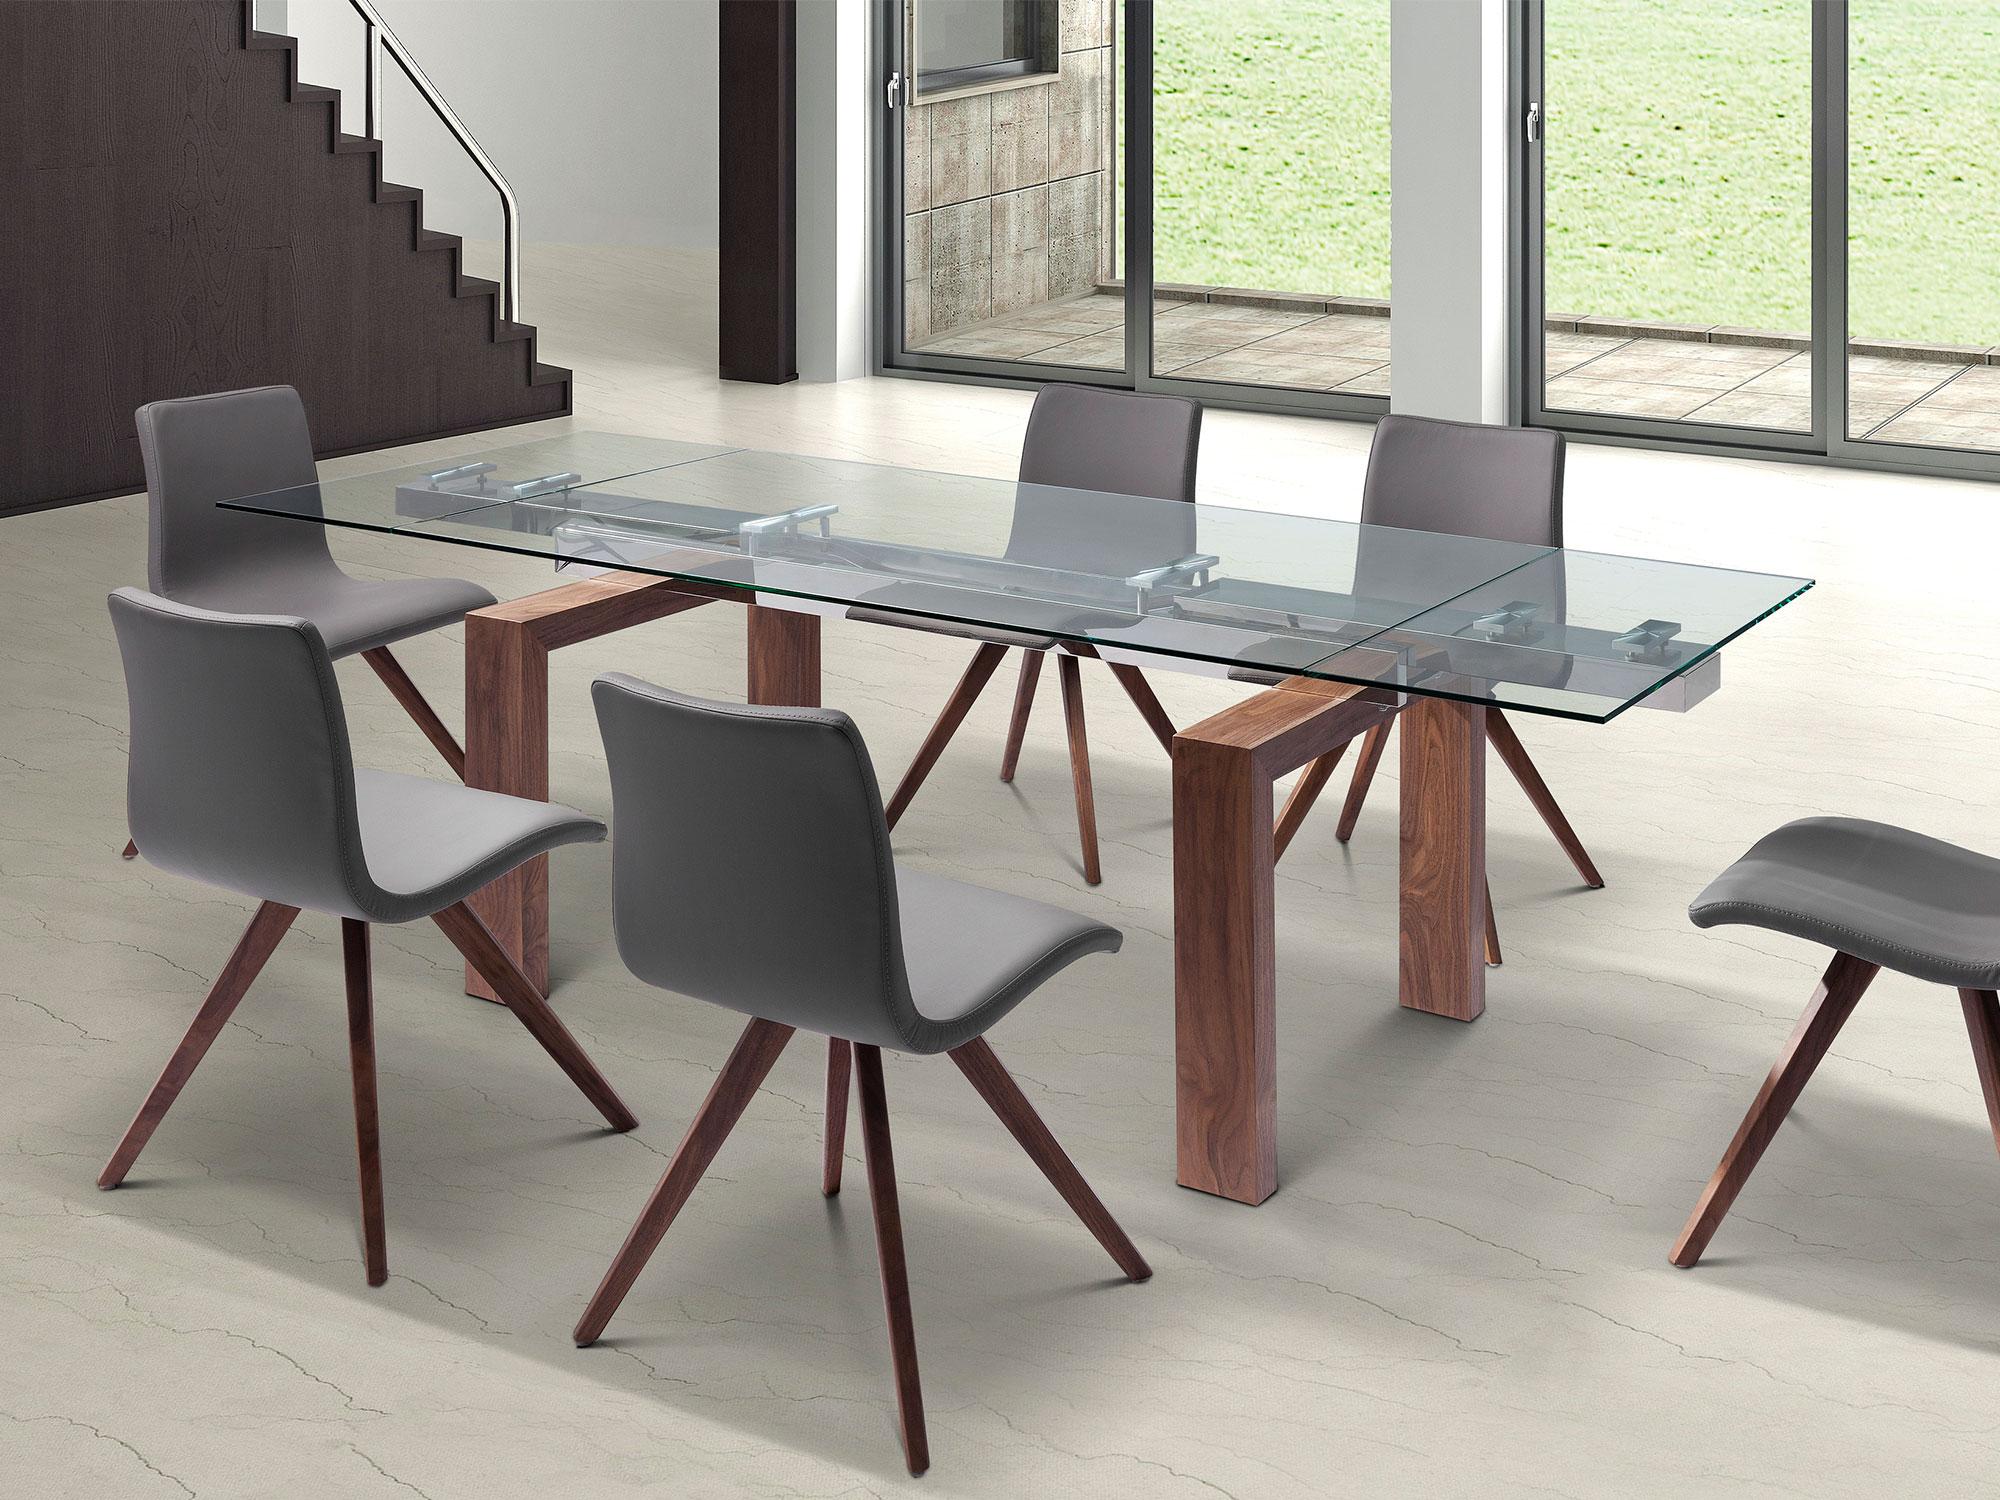 Modern Dining Room Set DT1256-WLT-5PC Davy DT1256-WLT-5PC in Walnut 